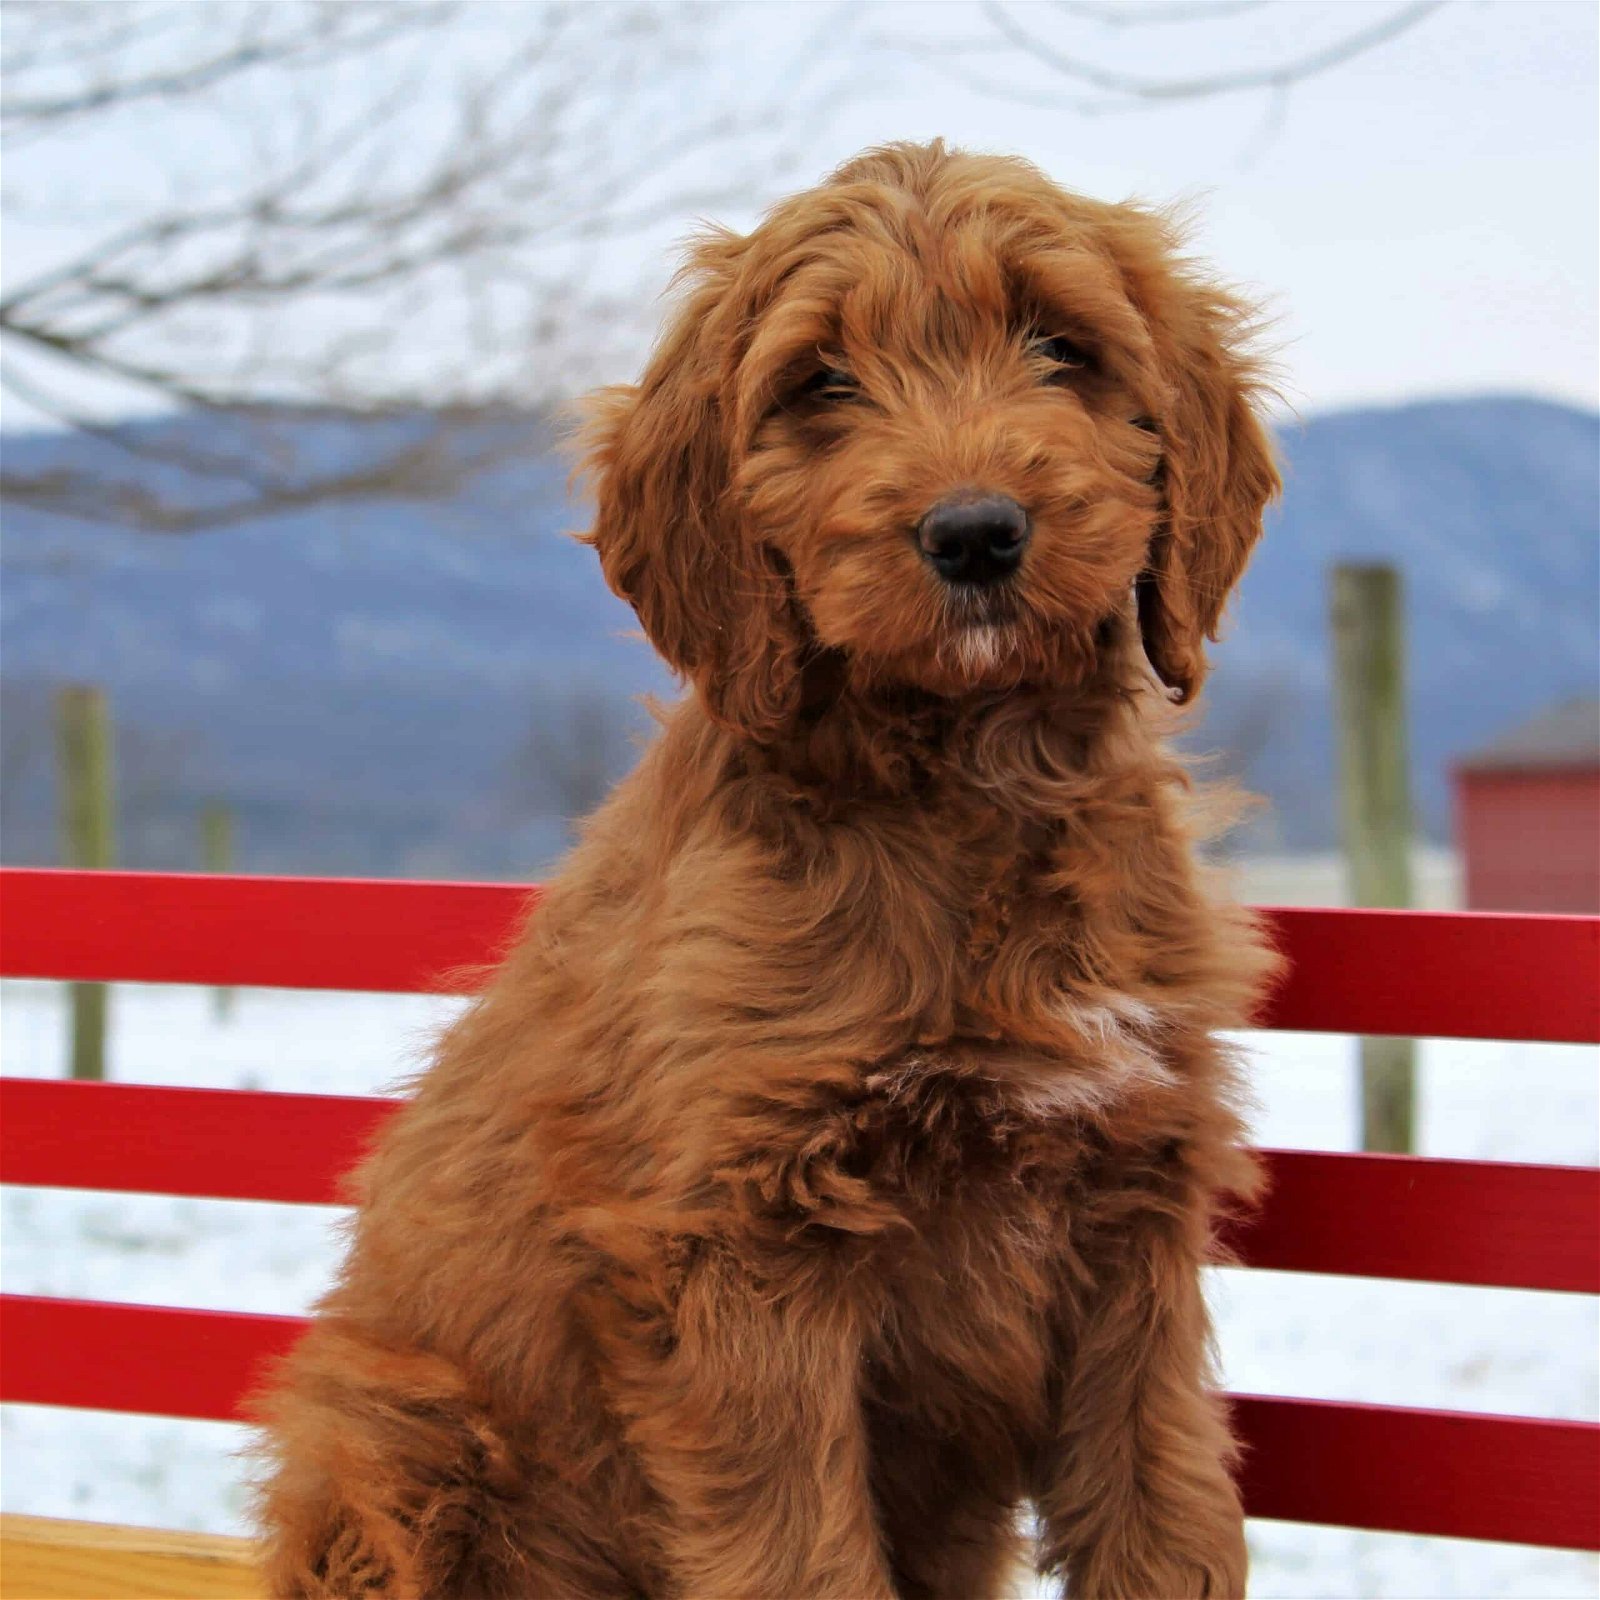 sample photo of Irish Doodle puppies for sale